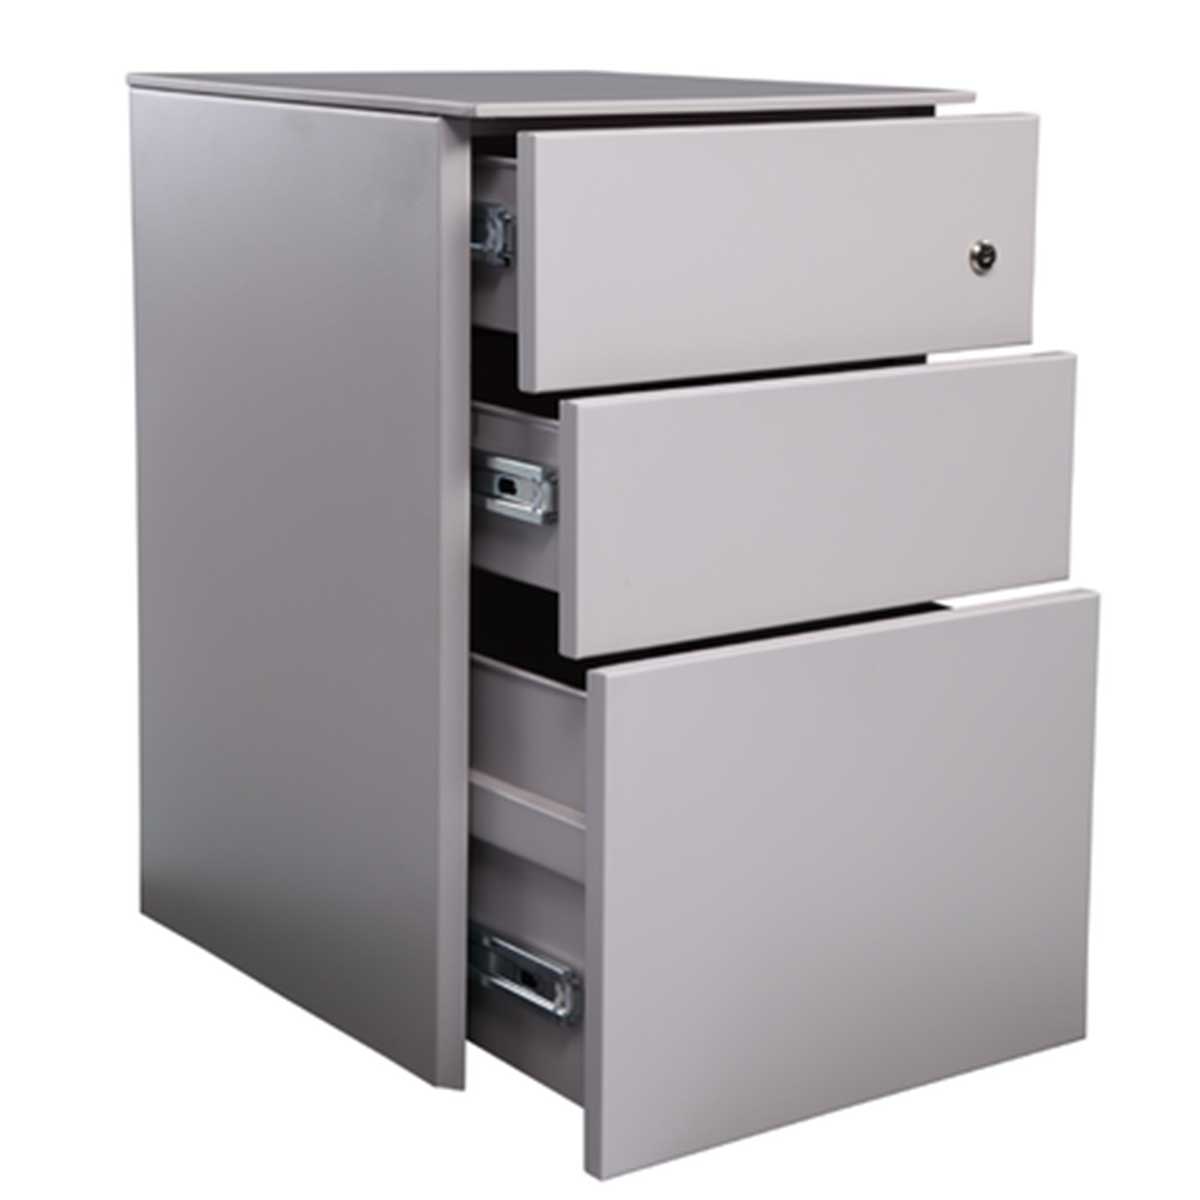 Pedestal Drawer Manufacturers, Suppliers in Rohini Sector 34